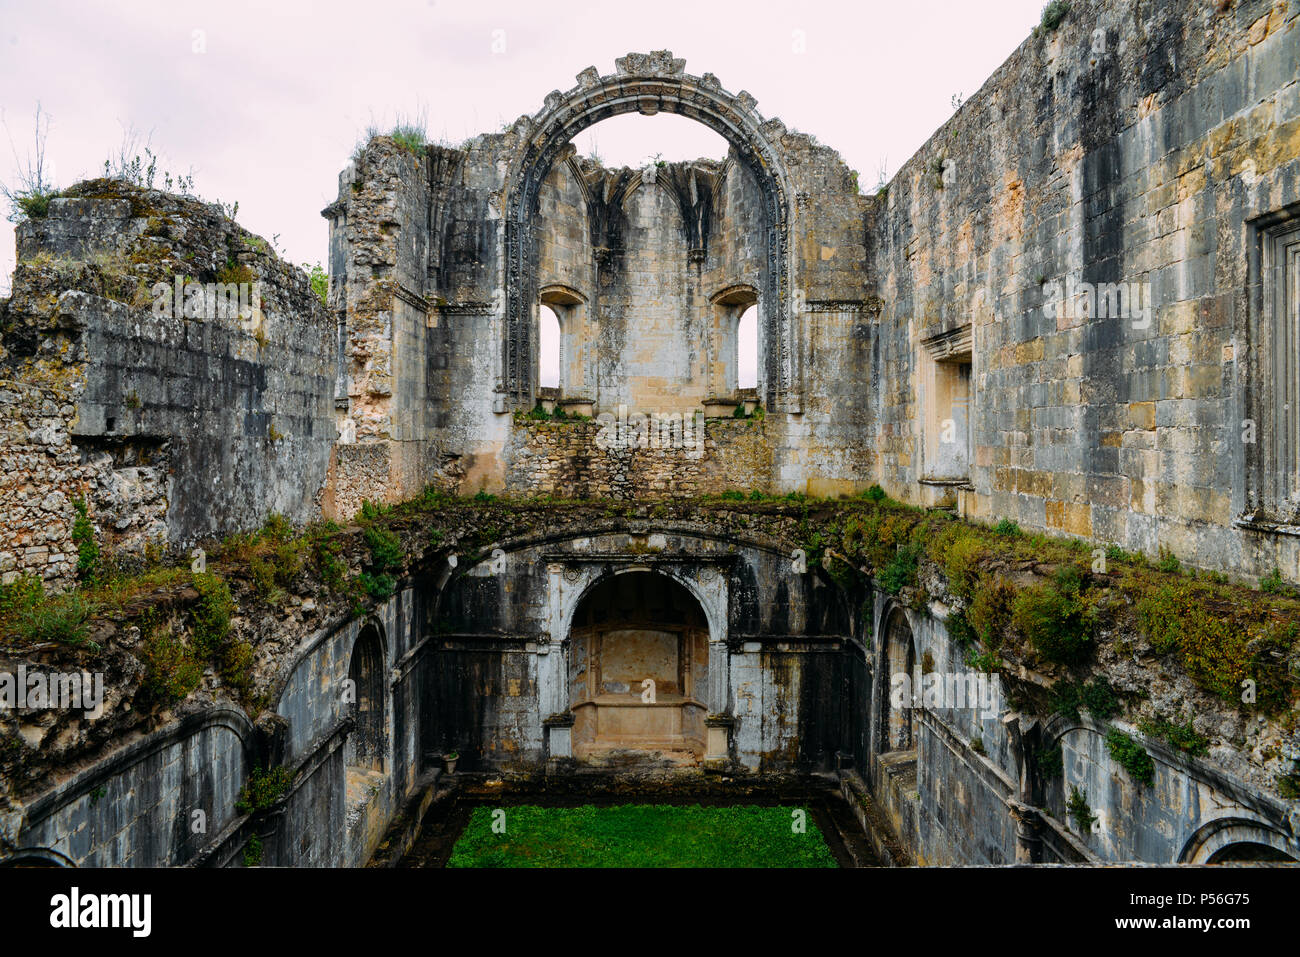 Tomar, Portugal - June 10, 2018: Ruins of 12th-century Convent of Tomar constructed by the Knights Templar Tomar, Portugal - UNESCO World Heritage Ref Stock Photo